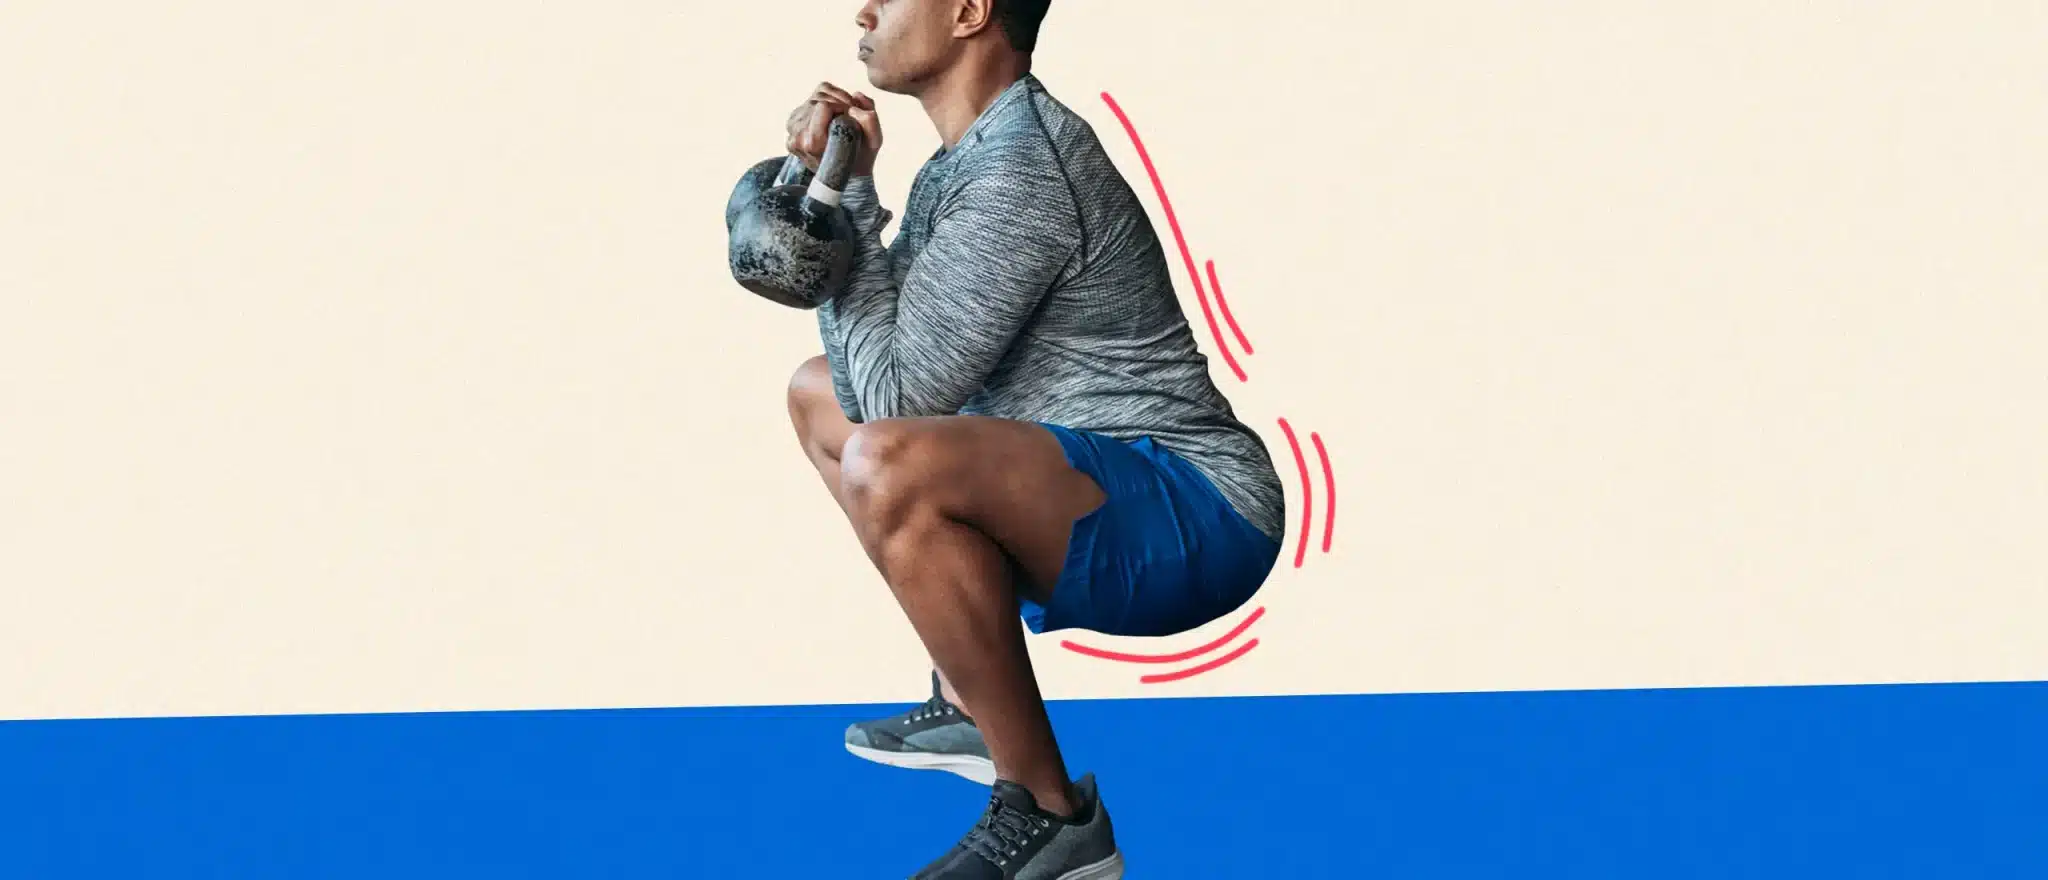 Back Pain When Squatting? Fix Your Butt Wink